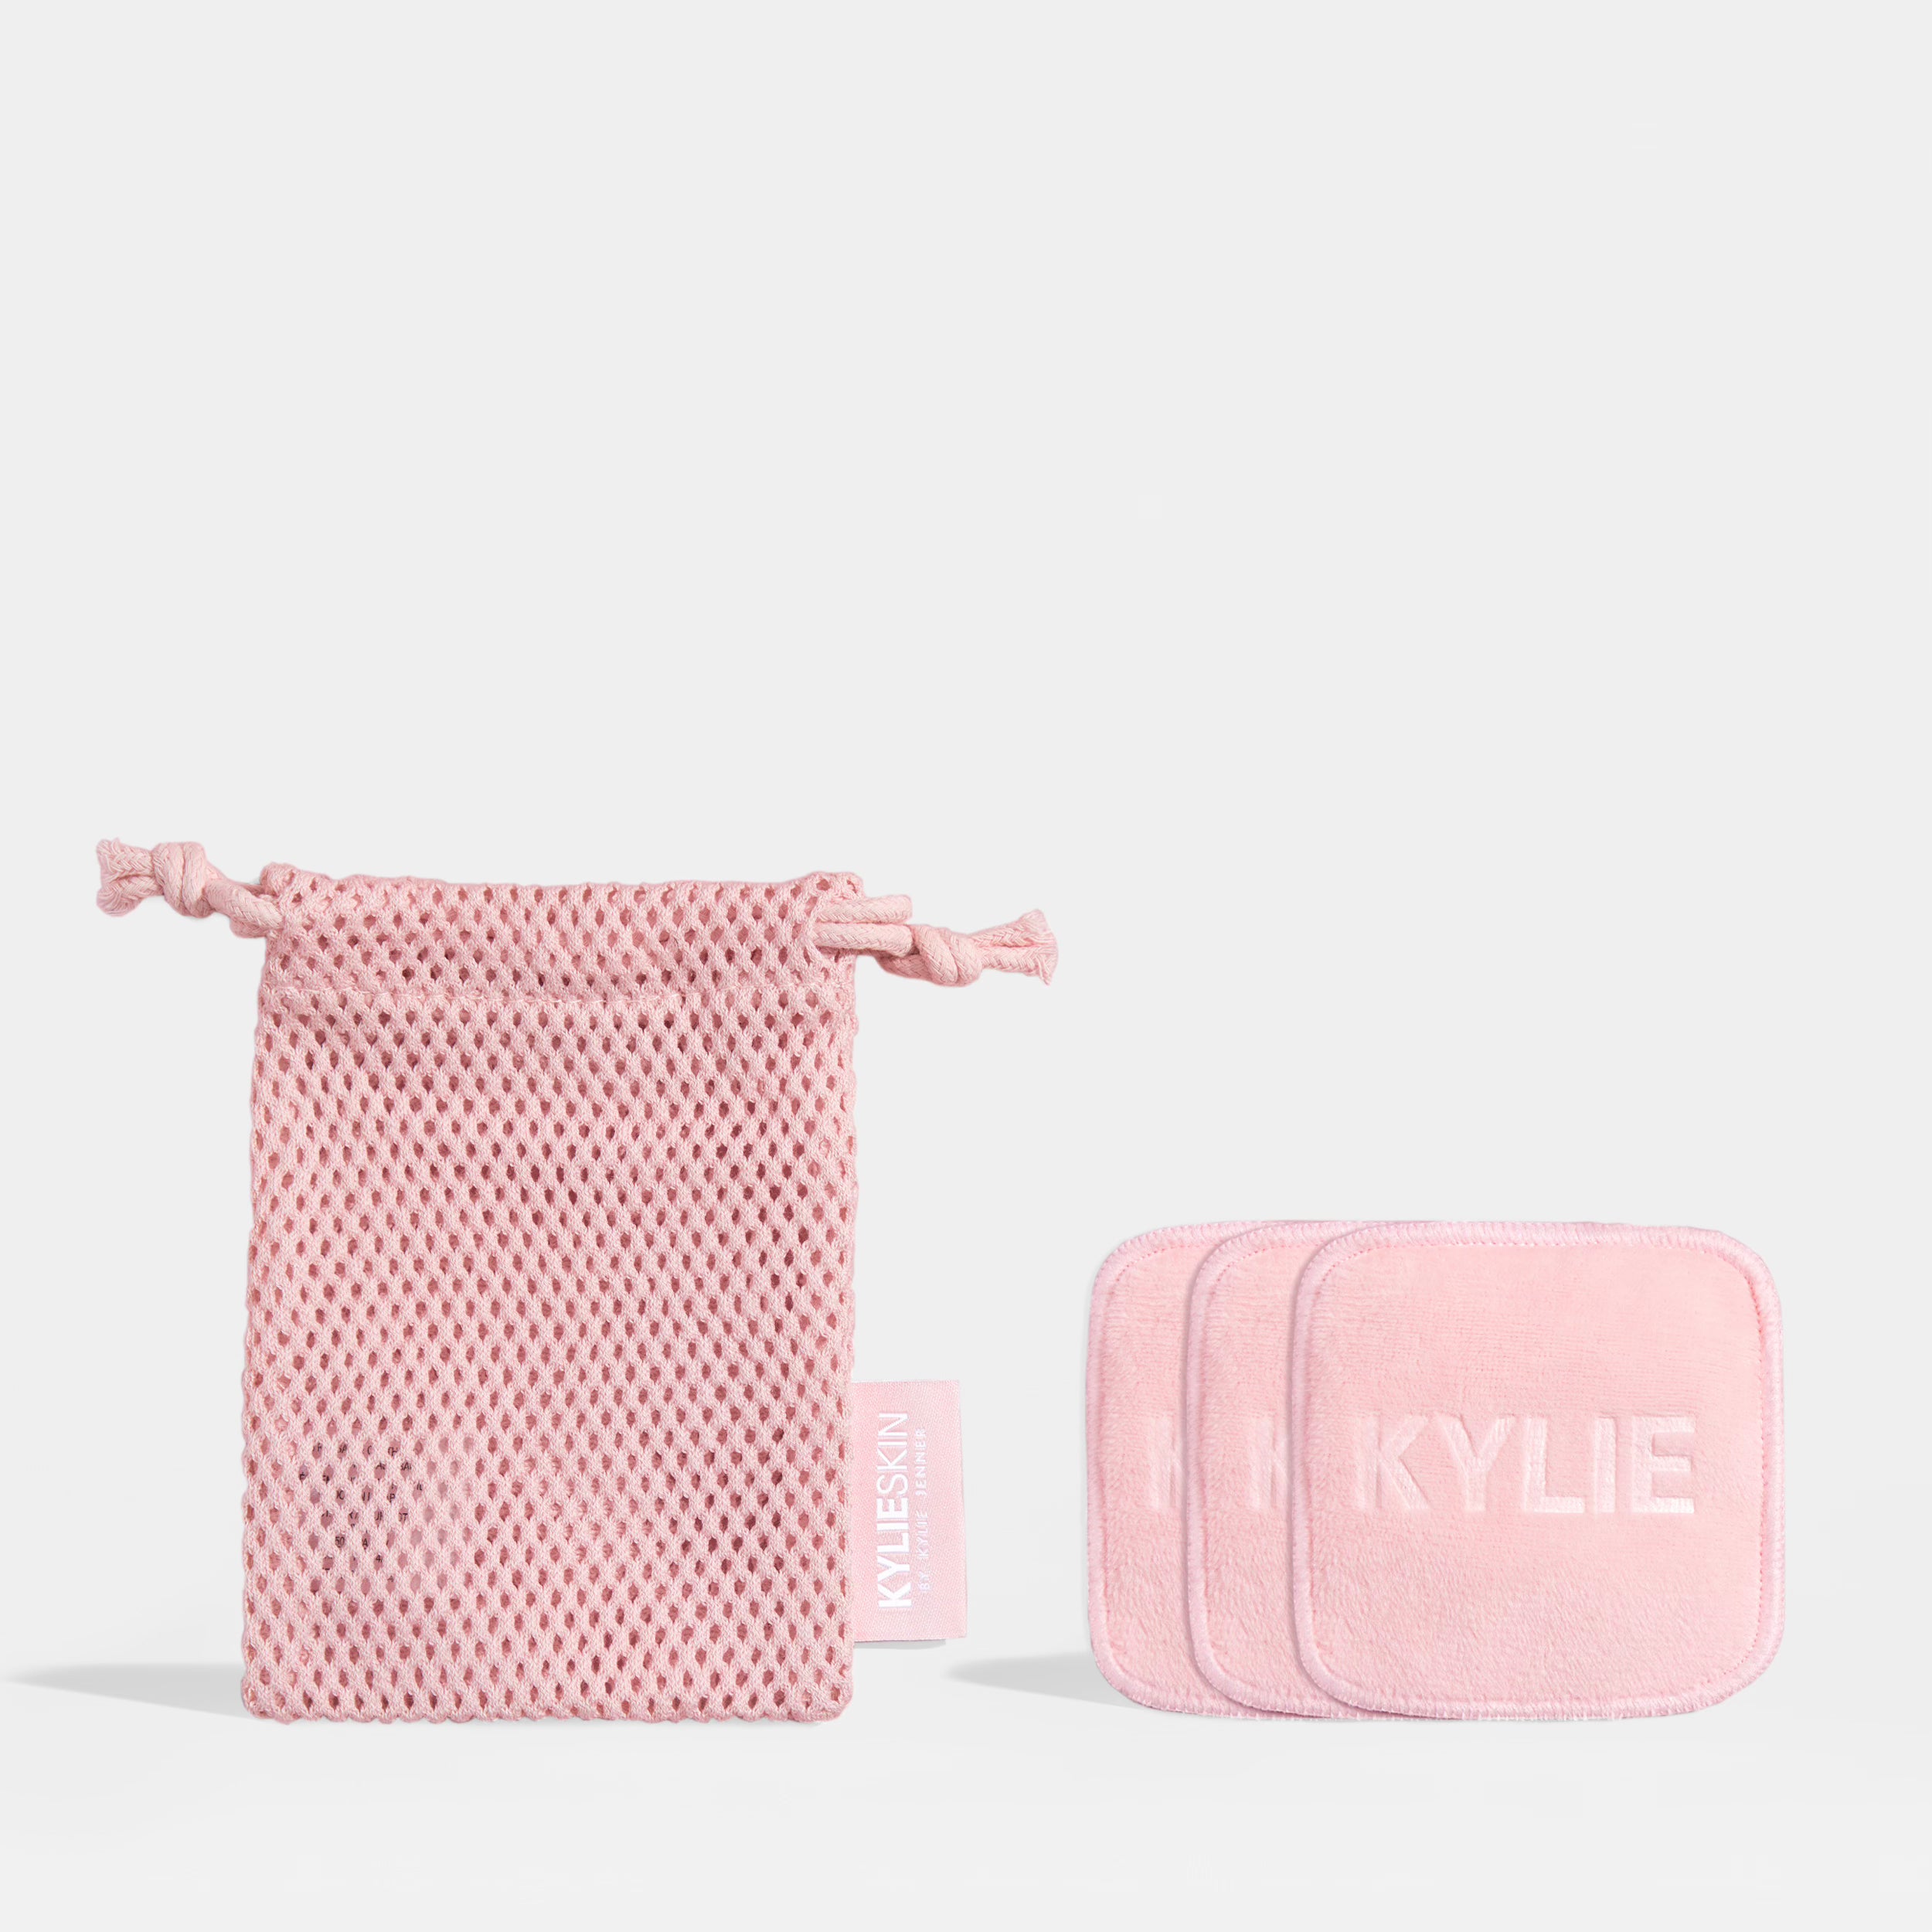 Kylie Lips Travel Case  Kylie Skin by Kylie Jenner – Kylie Cosmetics